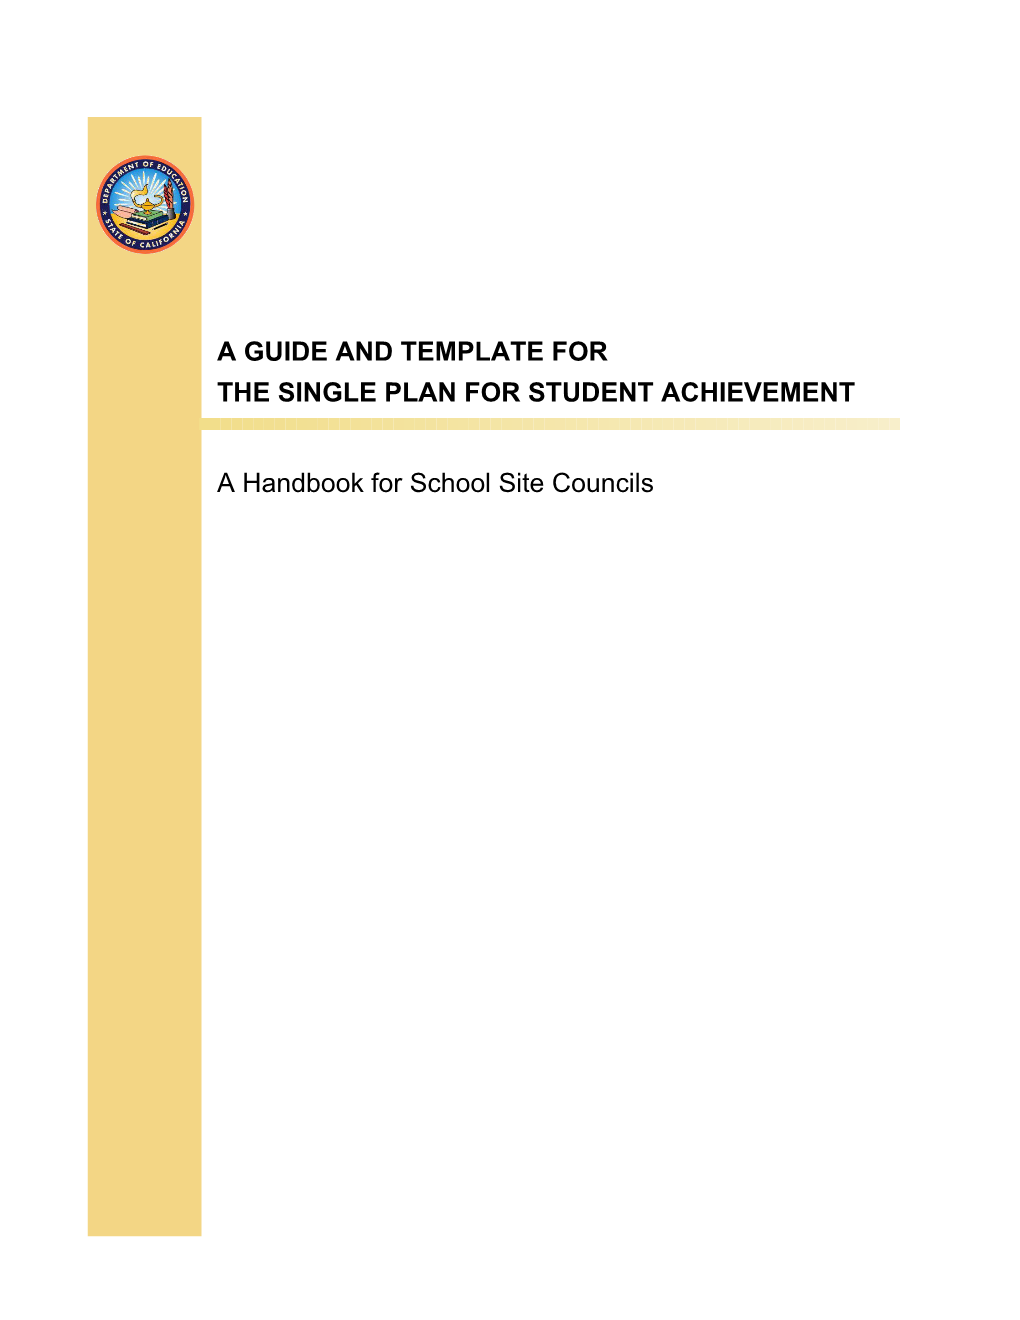 Guide for the SPSA - Single Plan for Student Achievement (CA Dept of Education)